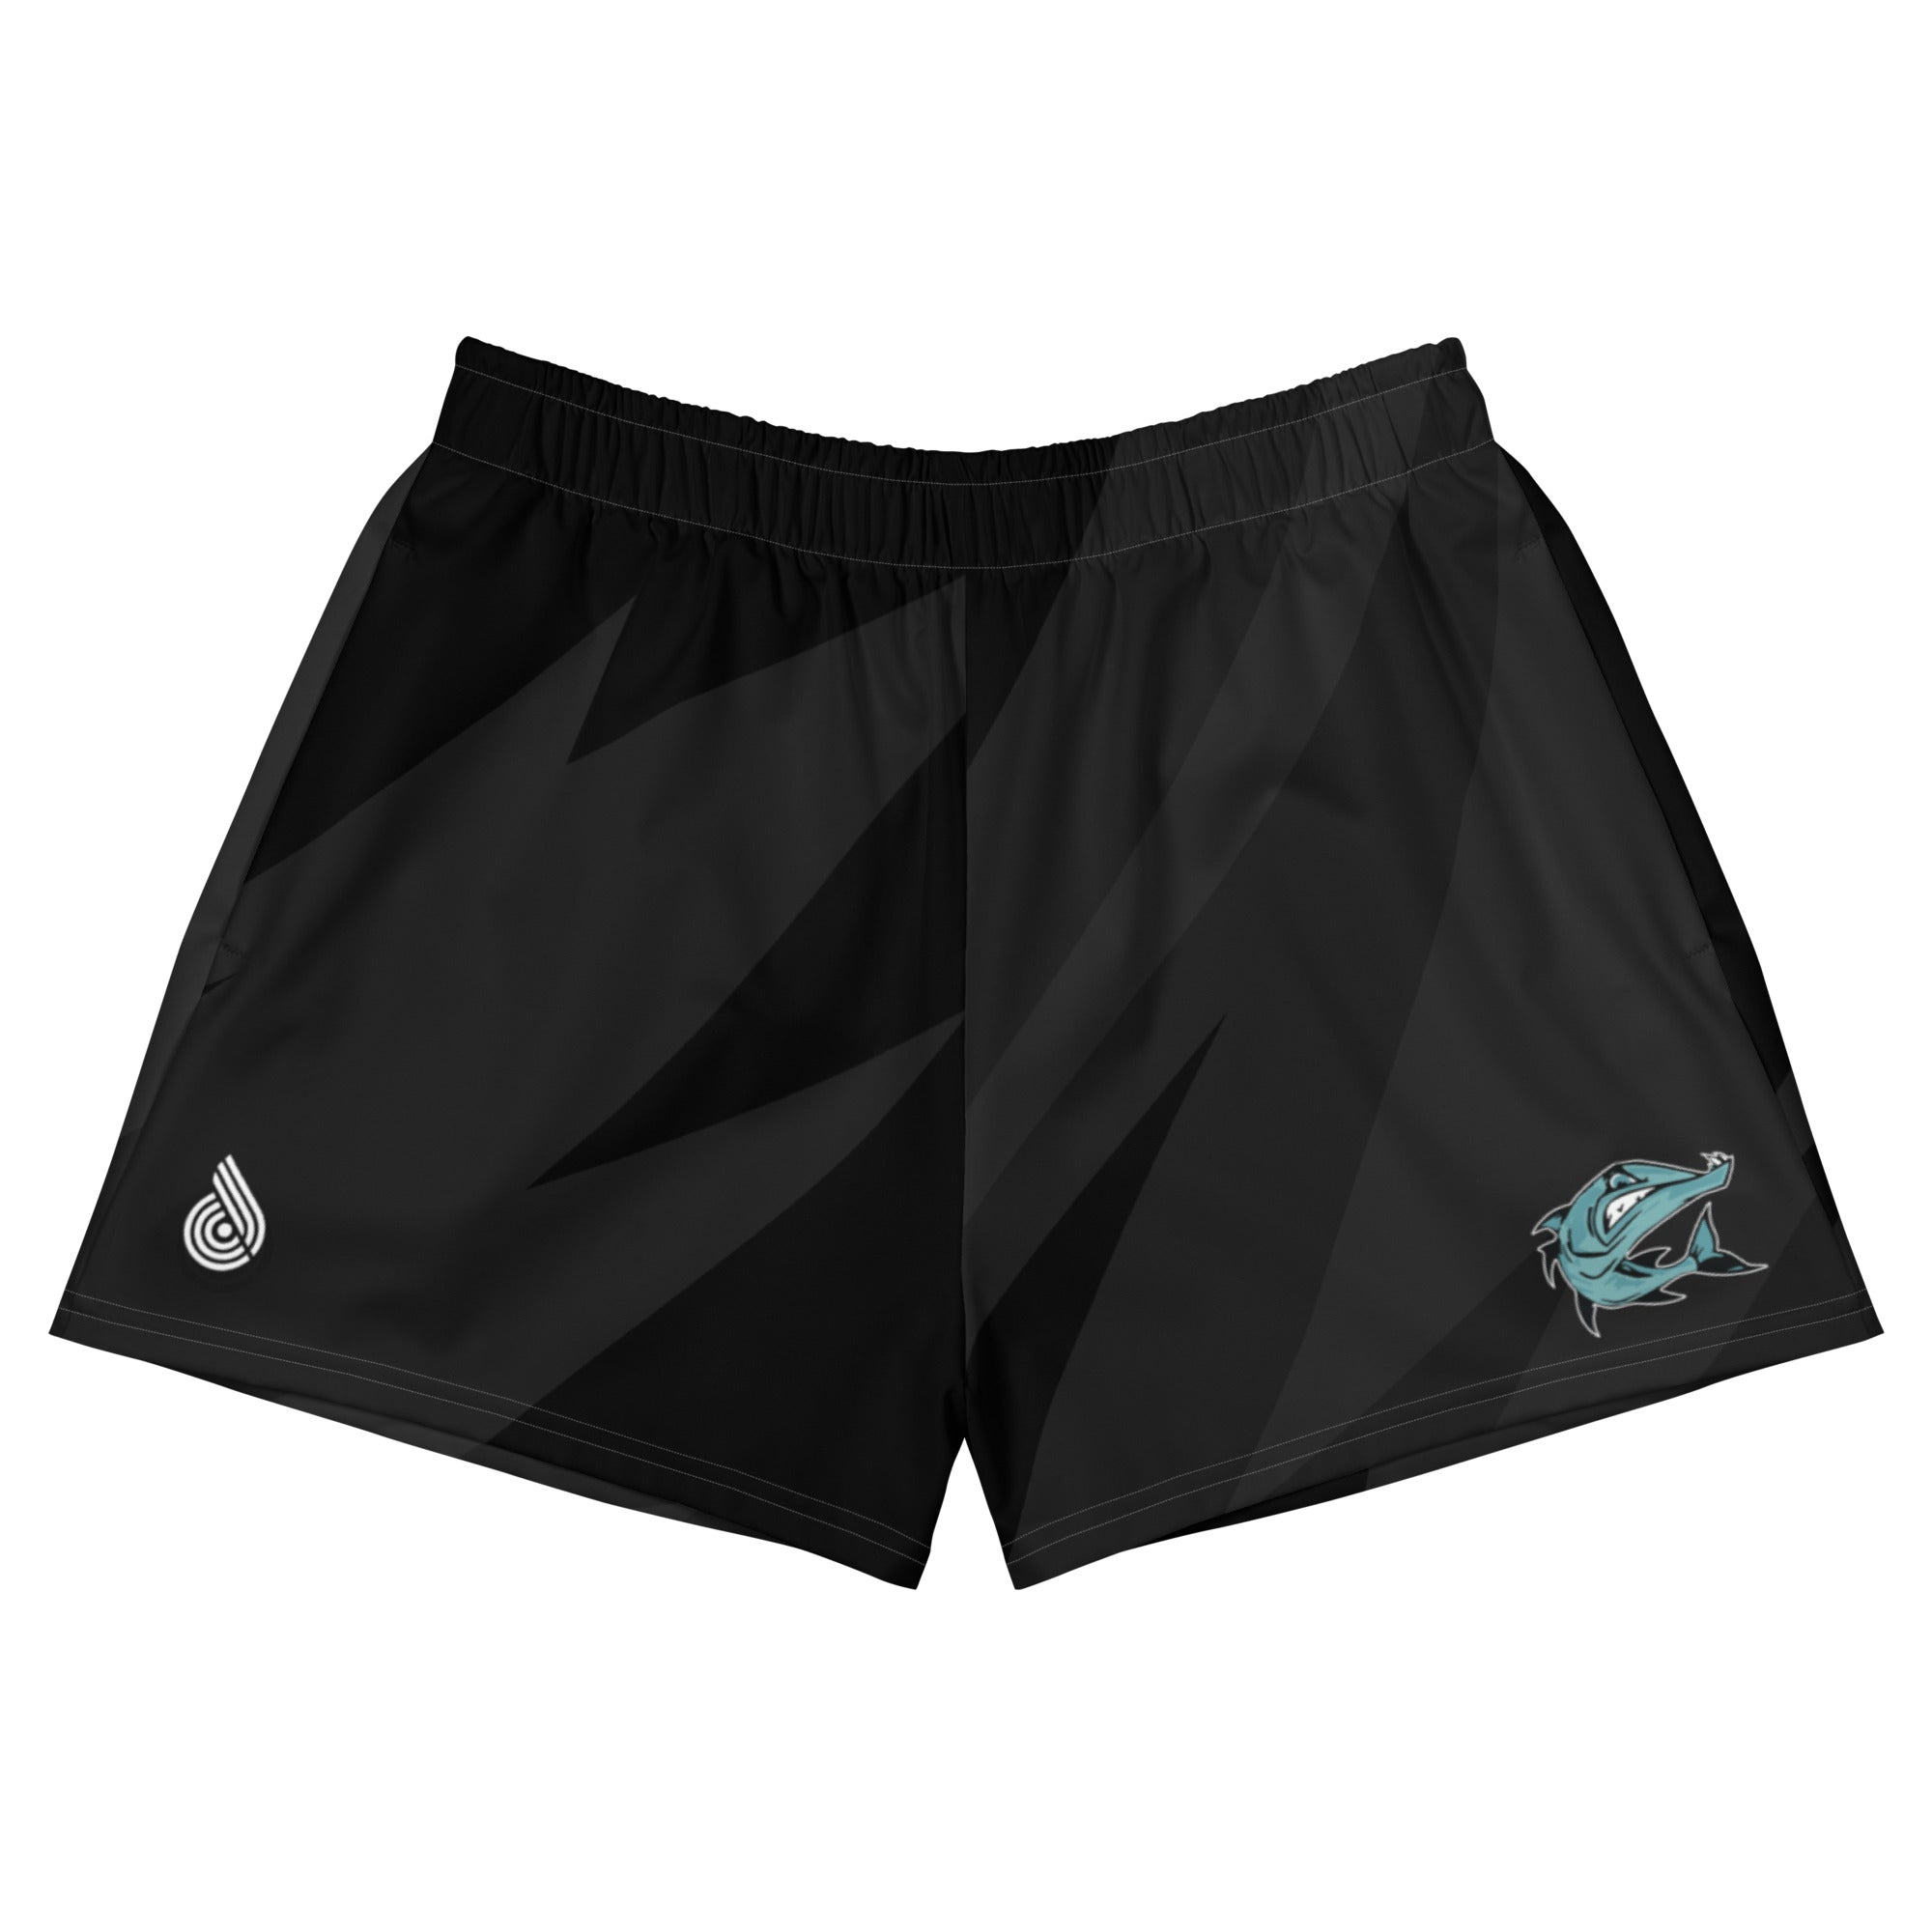 Coral Reef Women’s Athletic Shorts